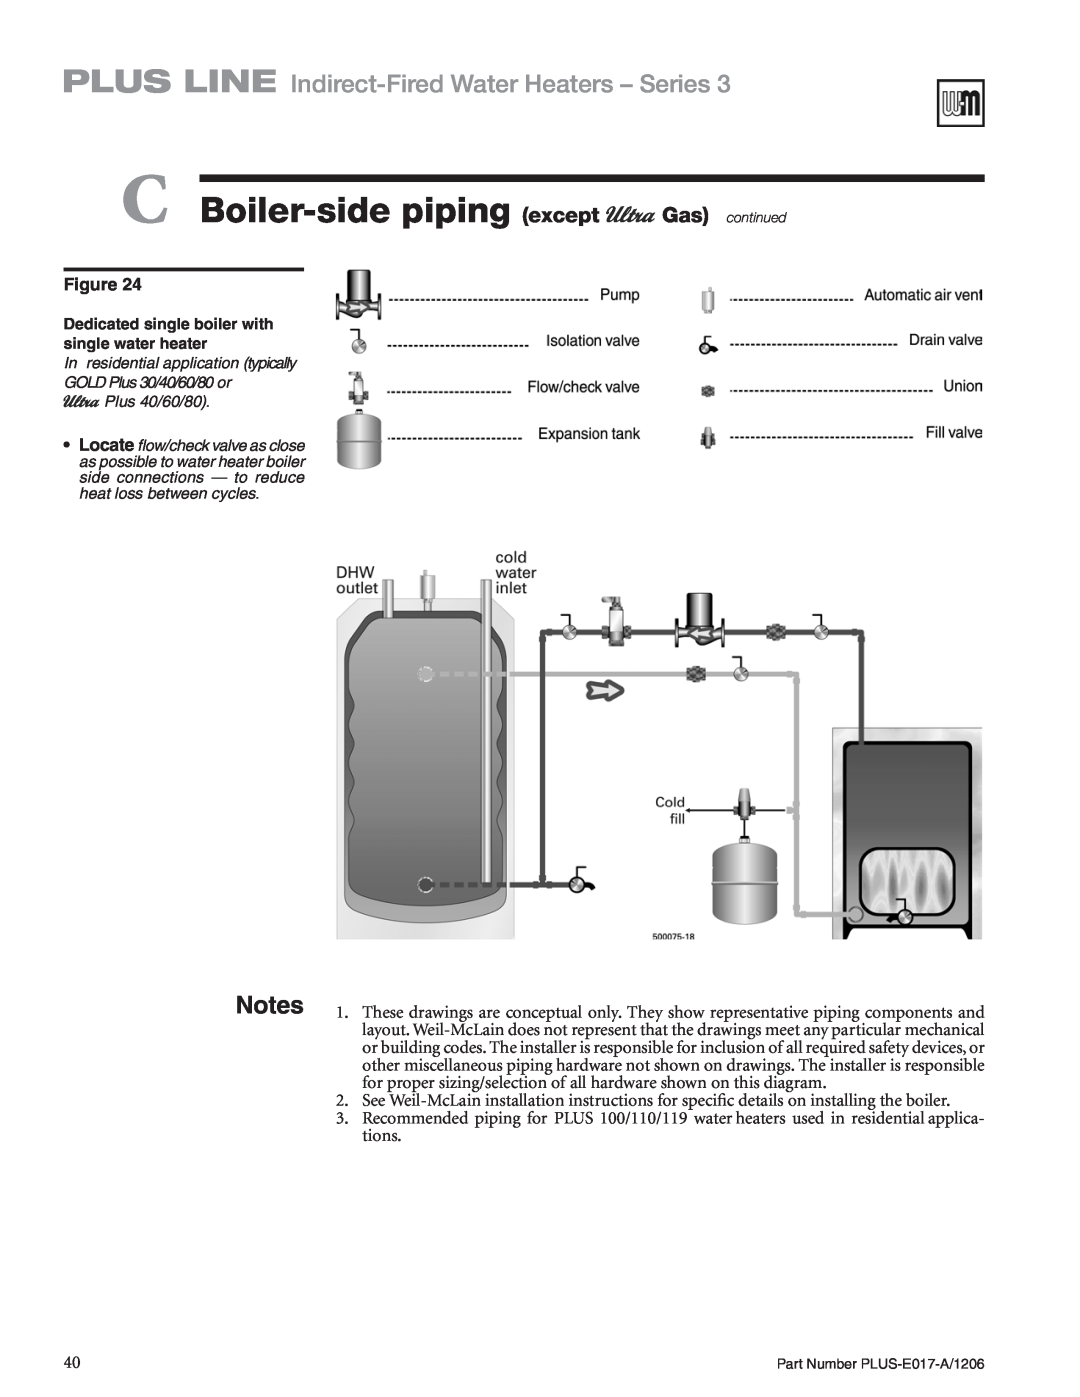 Weil-McLain PLUS-E017-A/1206 C Boiler-sidepiping except Gas continued, PLUS LINE Indirect-FiredWater Heaters - Series 